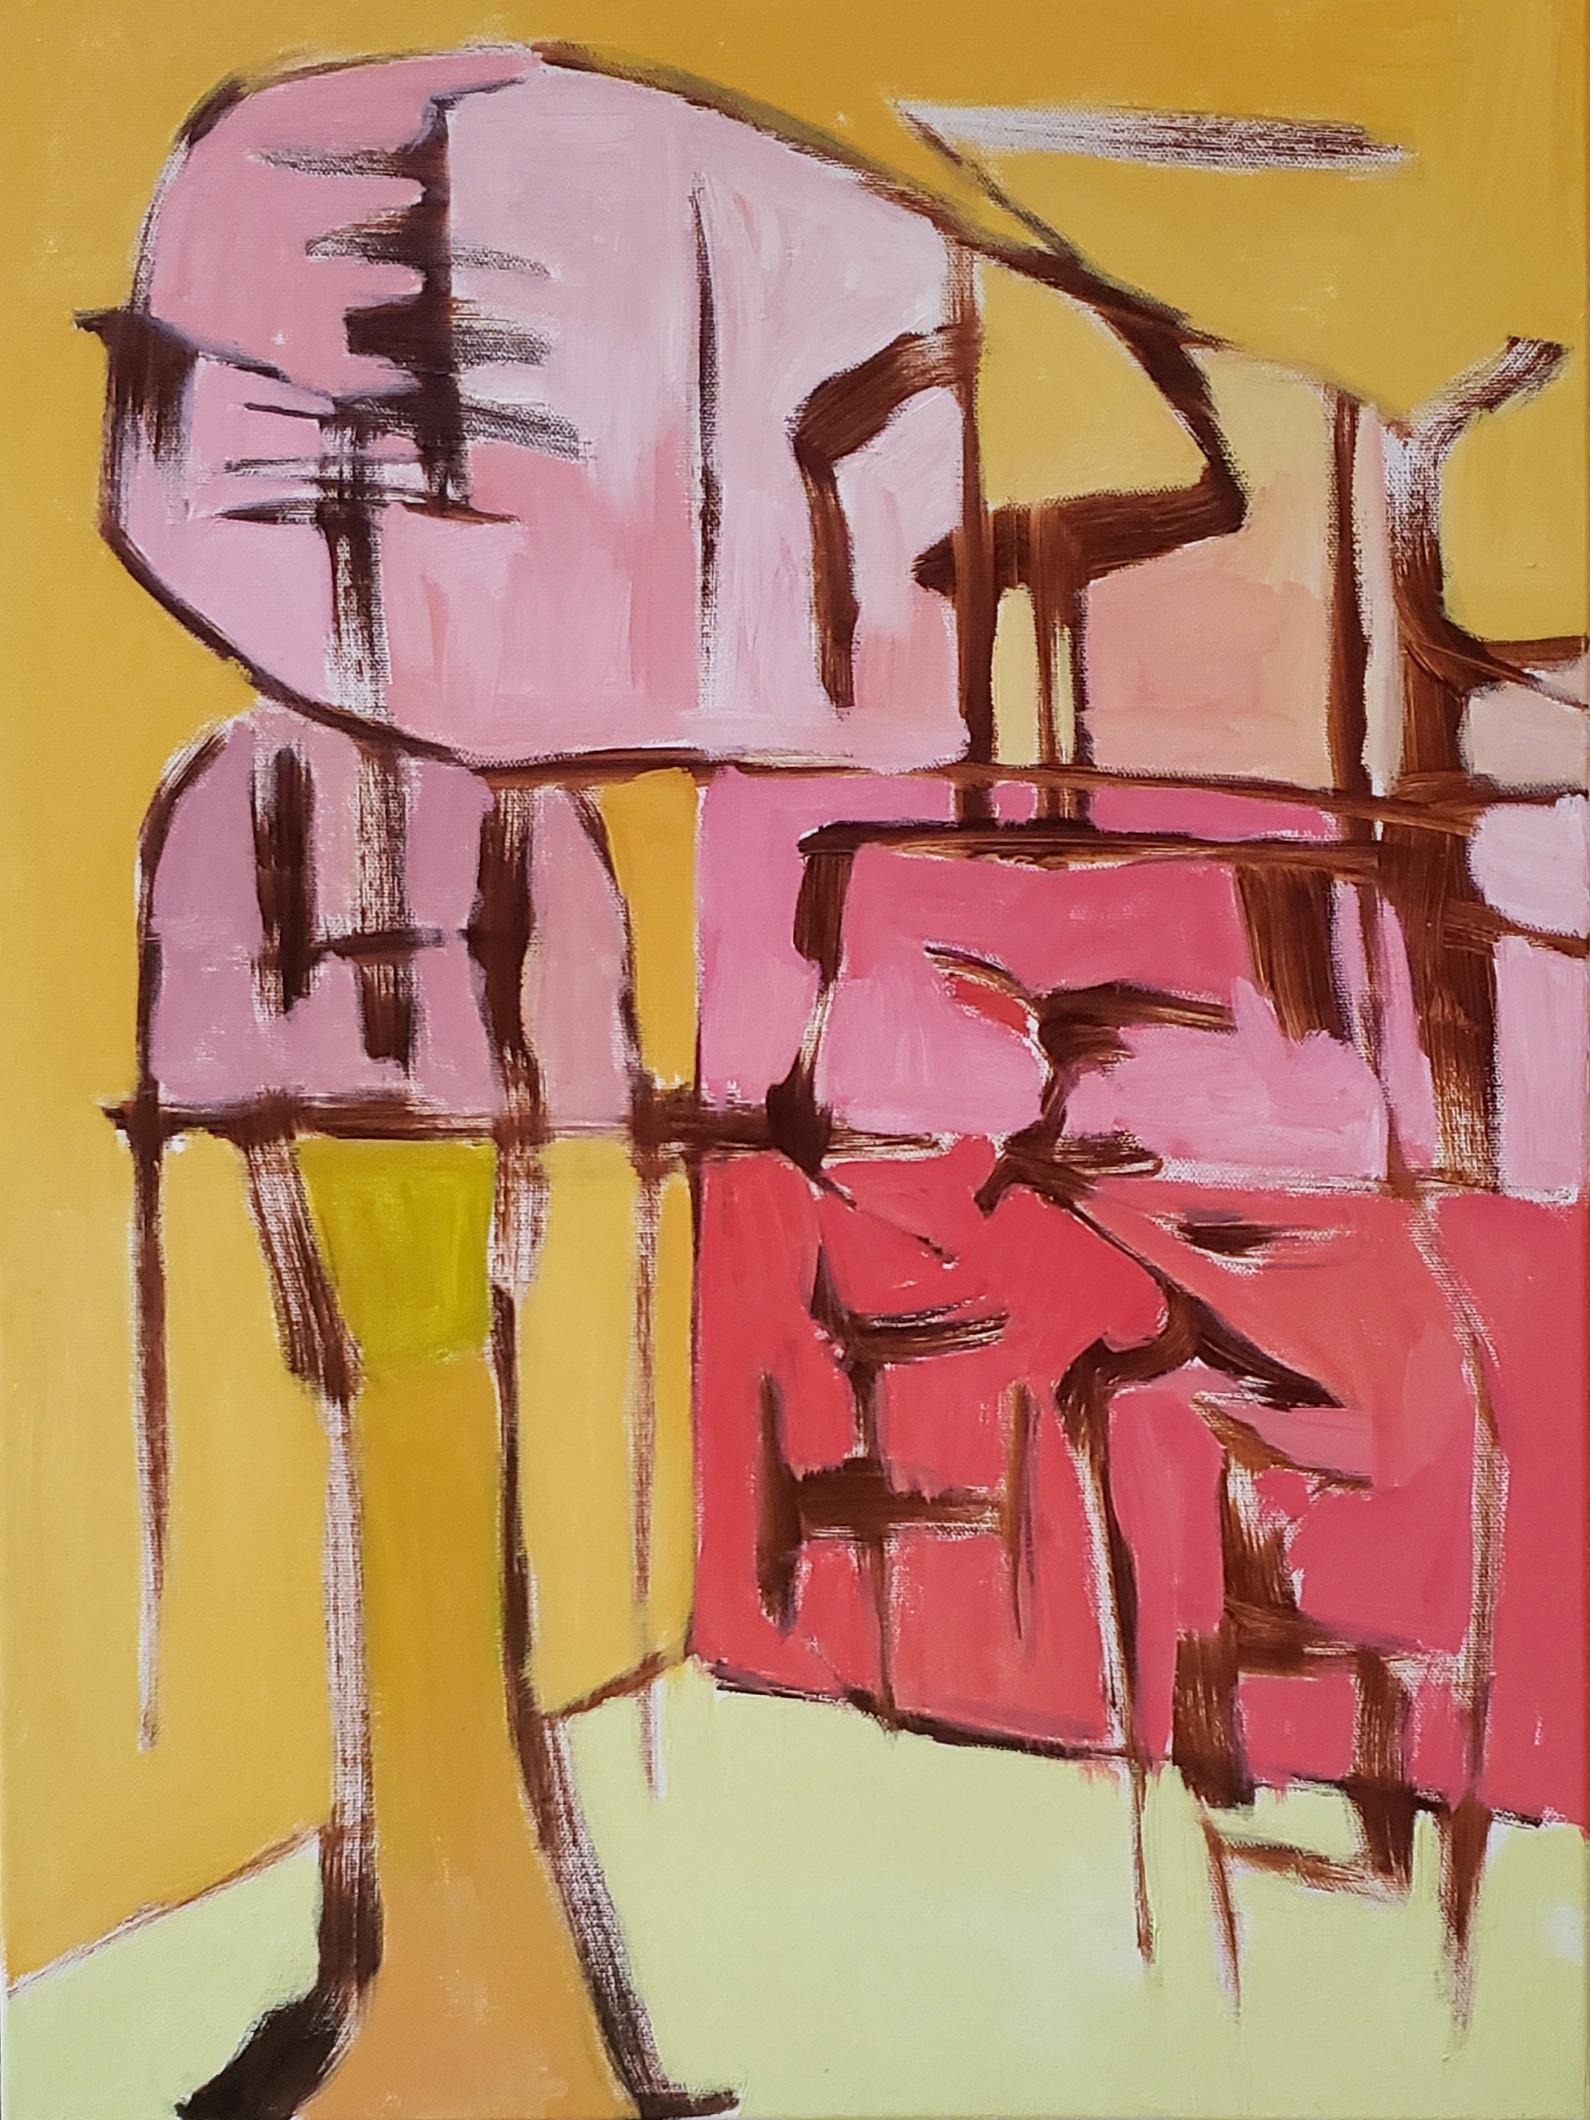 Michael Krasowitz Abstract Painting - "Little Big Man" bright color gestural abstract painting w yellow & orange tone